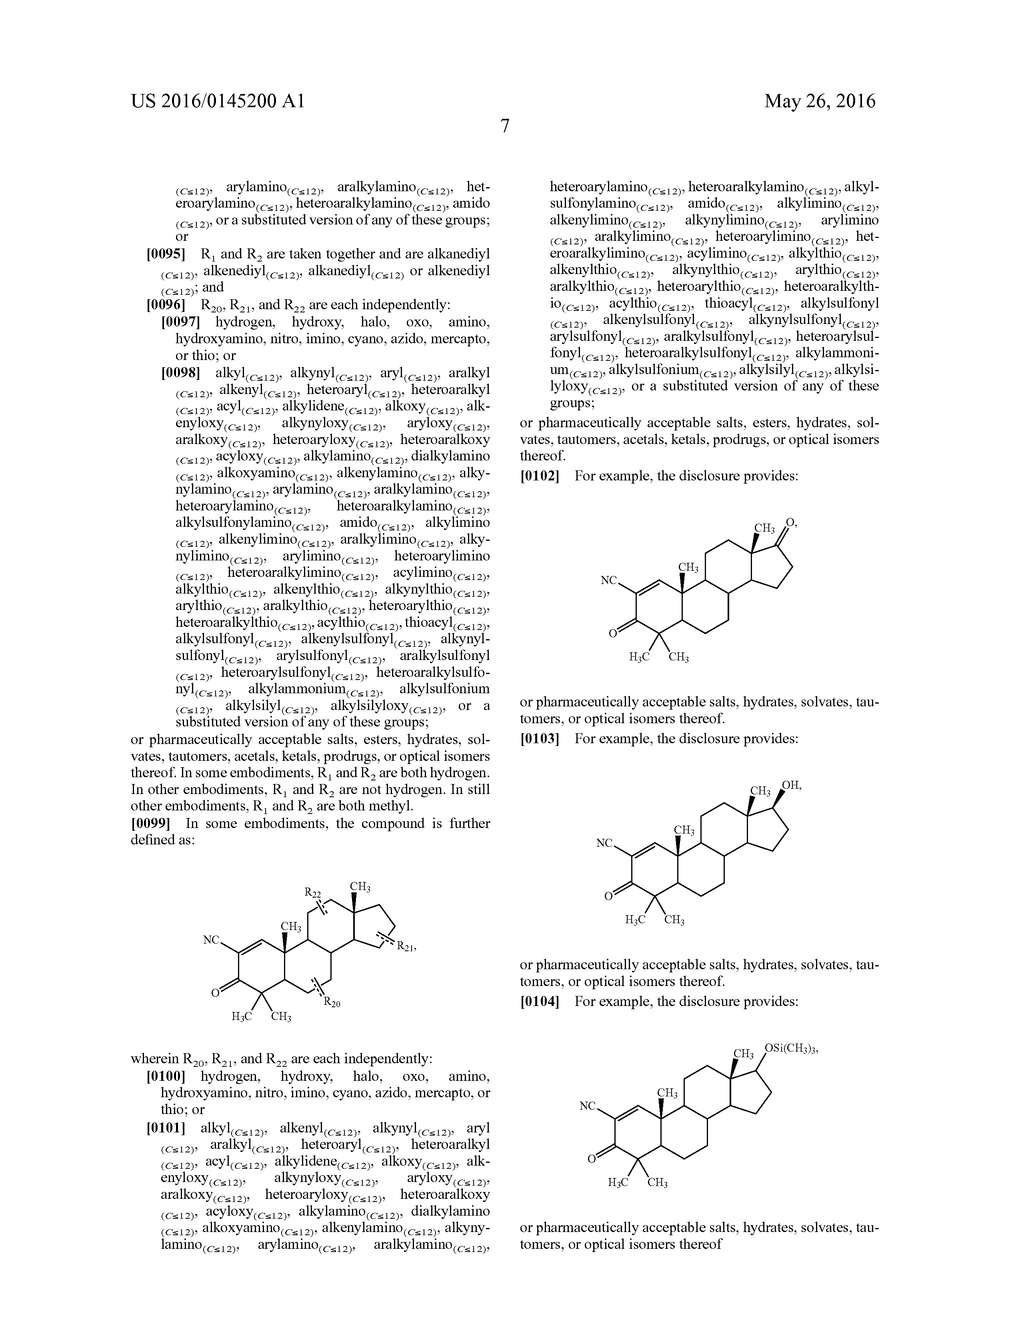 NATURAL PRODUCT ANALOGS INCLUDING AN ANTI-INFLAMMATORY CYANOENONE     PHARMACORE AND METHODS OF USE - diagram, schematic, and image 32